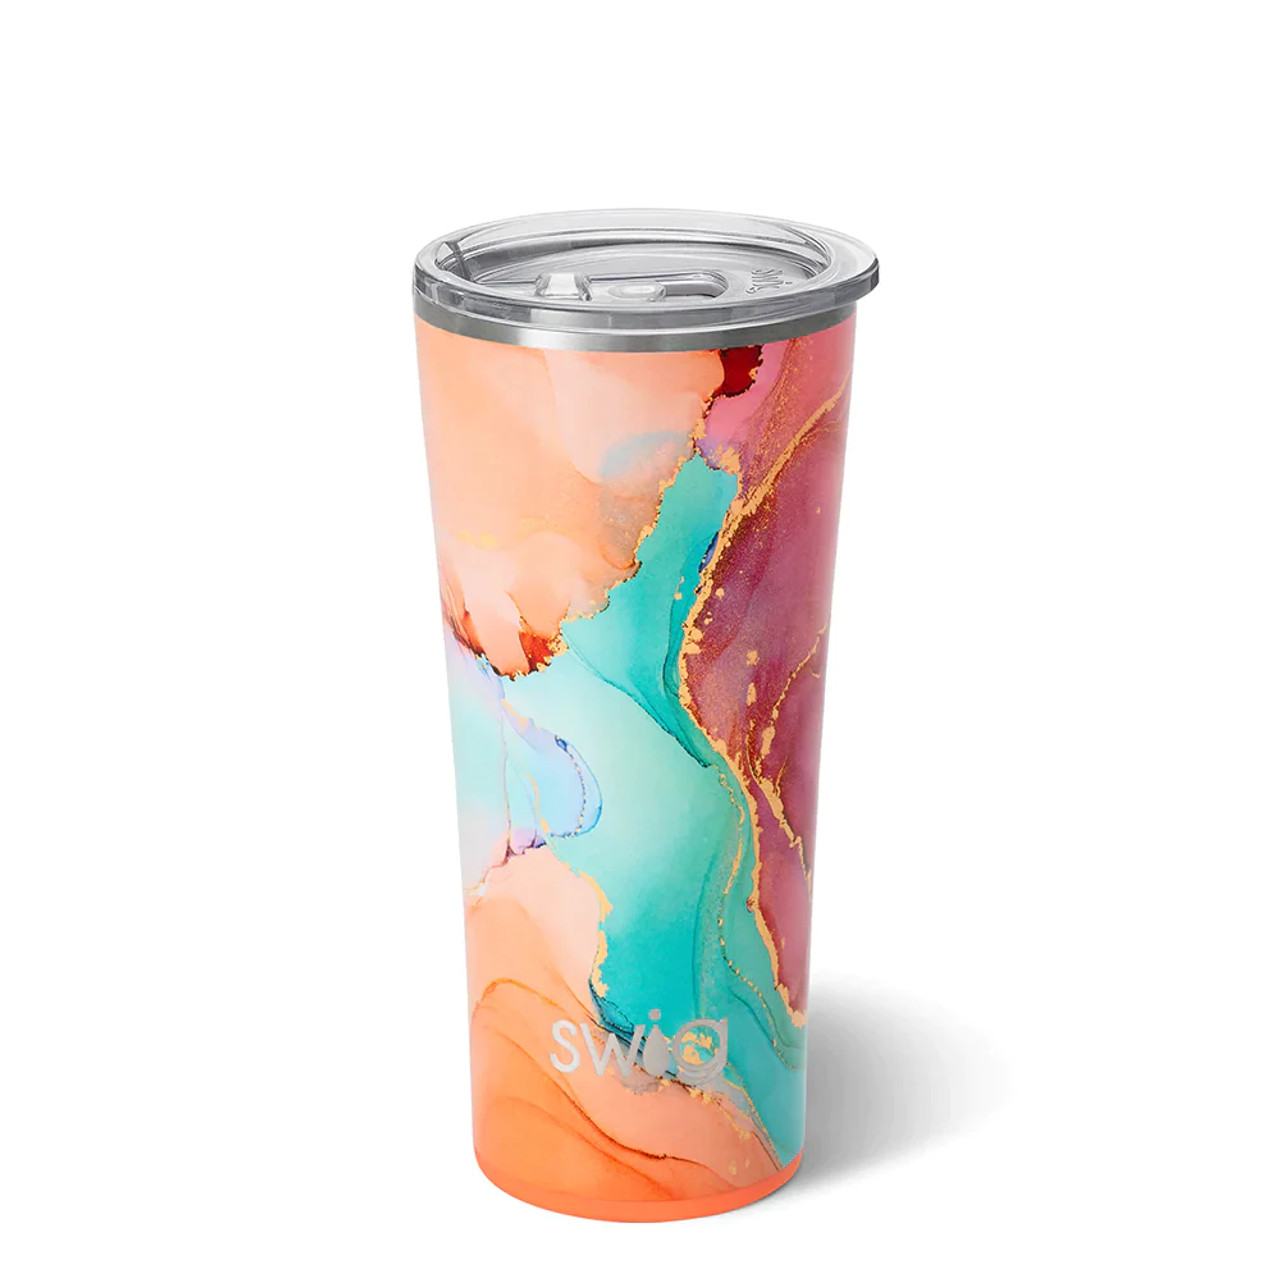 https://cdn11.bigcommerce.com/s-e3nb6xi/images/stencil/1280x1280/products/25253/126981/swig-life-signature-22oz-insulated-stainless-steel-tumbler-dreamsicle-main__27935.1689104947.jpg?c=2